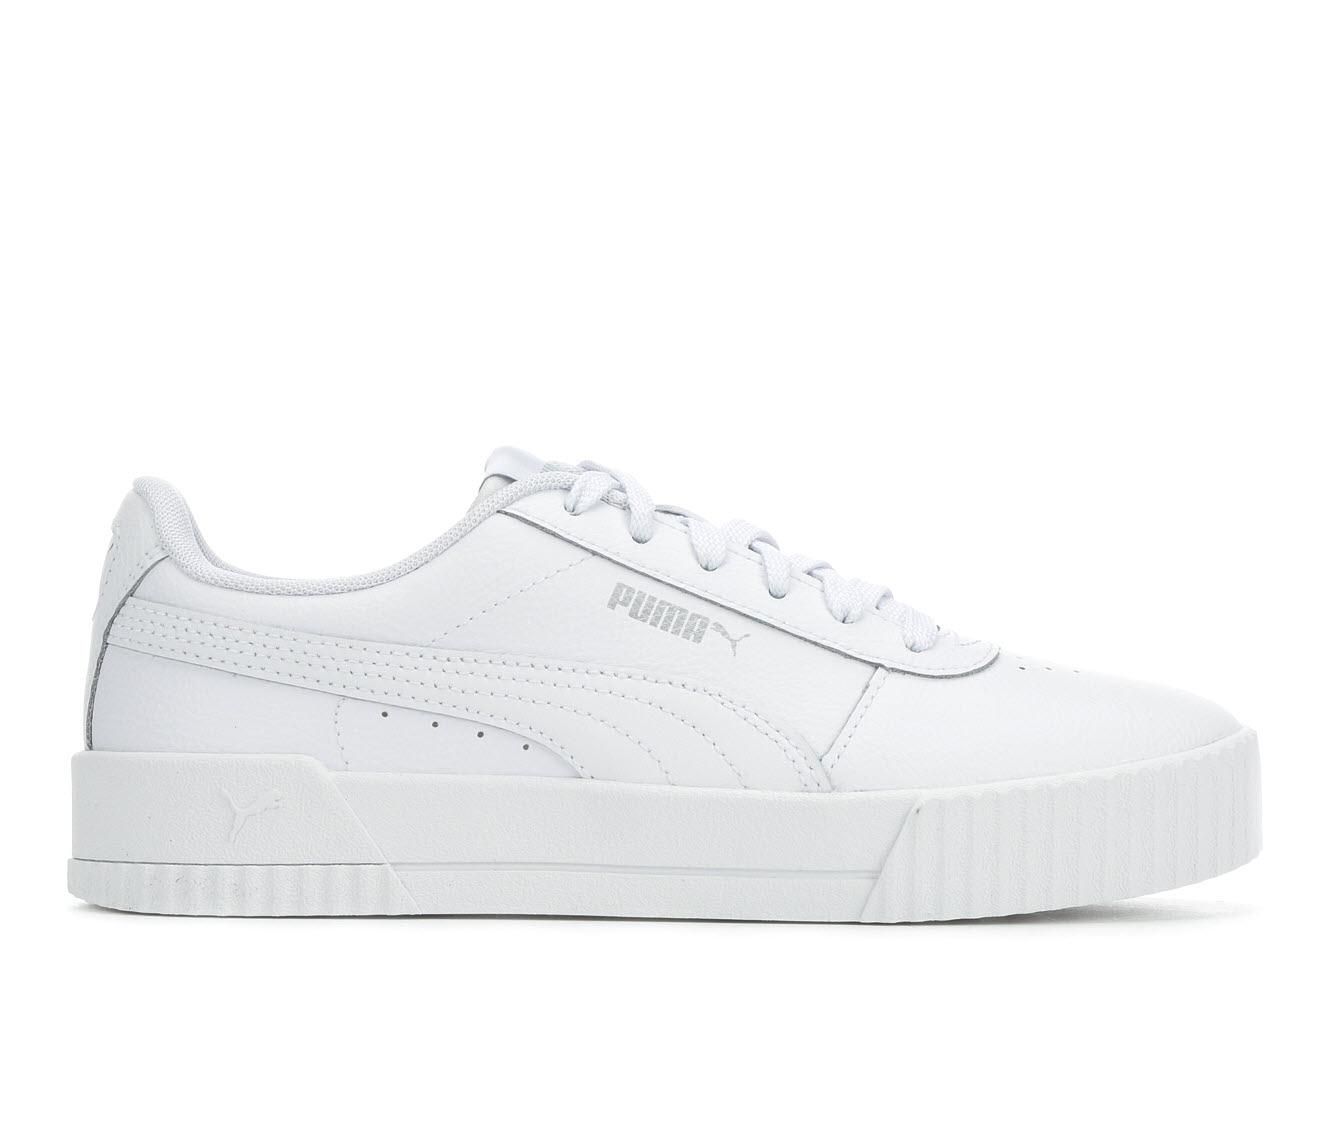 PUMA Carina Leather Casual Sneakers in White, Silver (White) - Save 26% ...